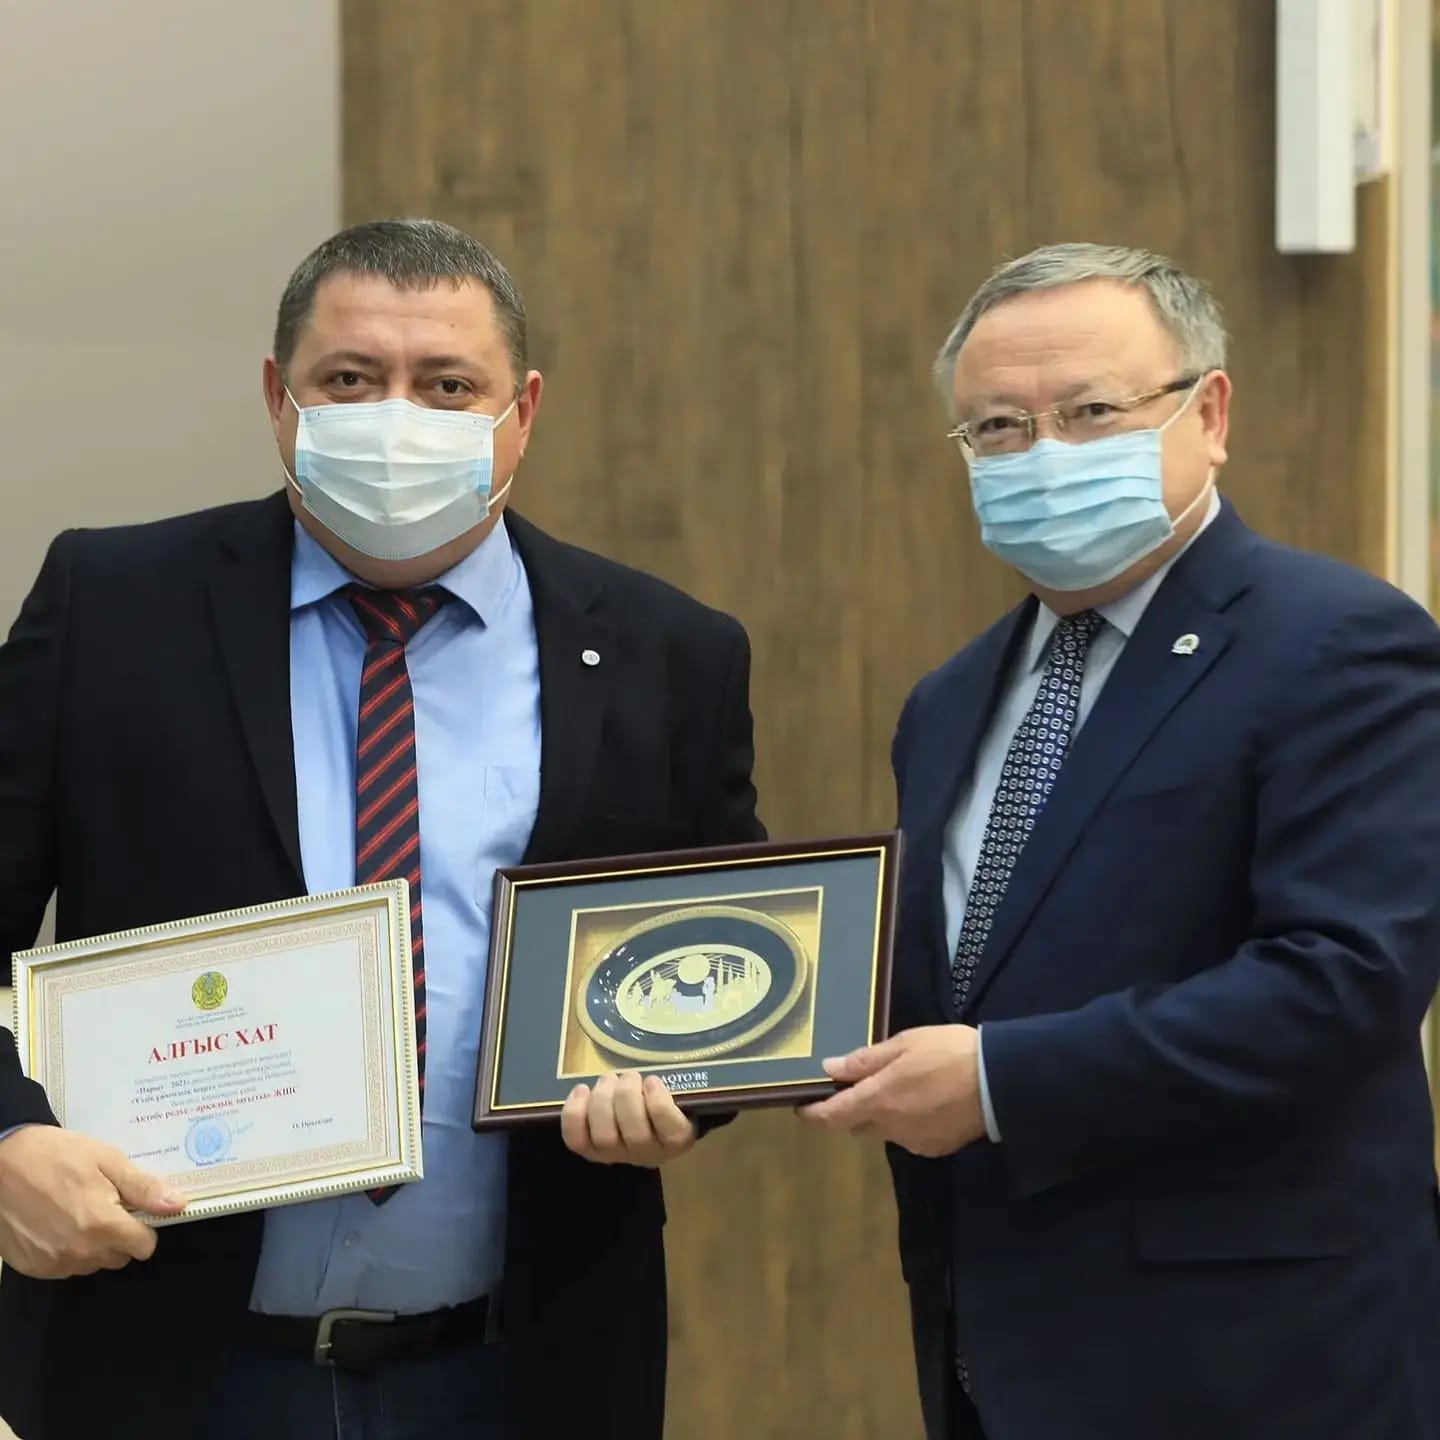 On Tuesday, December 7, solemn  ceremony of awarding laureates of “Altyn Sapa” award and republican  competition for social responsibility of business “Paryz” took place in  Nur-Sultan.